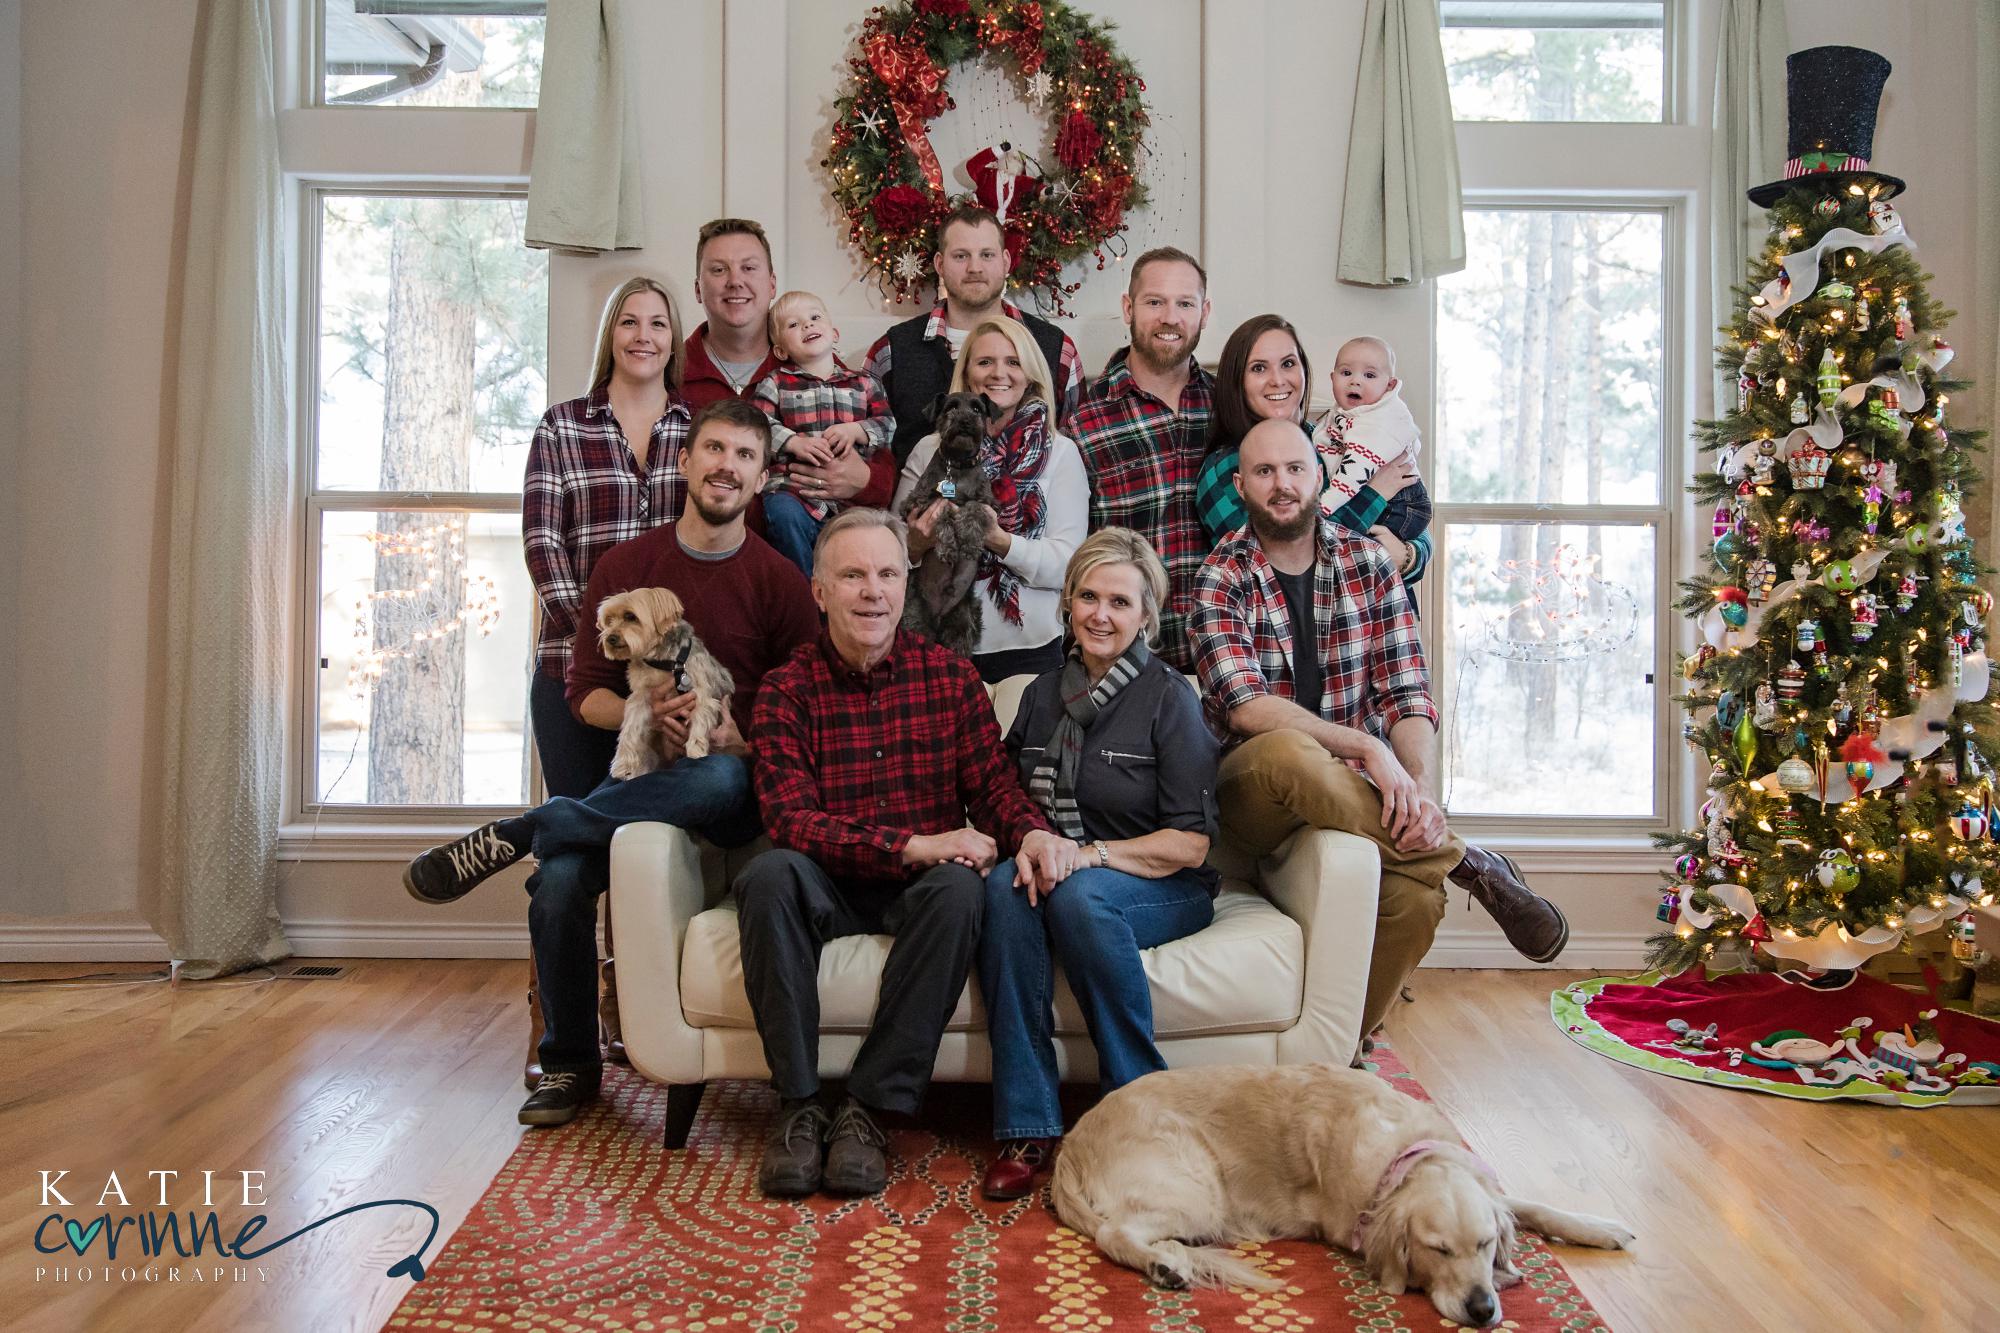 Large extended Family pose on couch for a family portrait